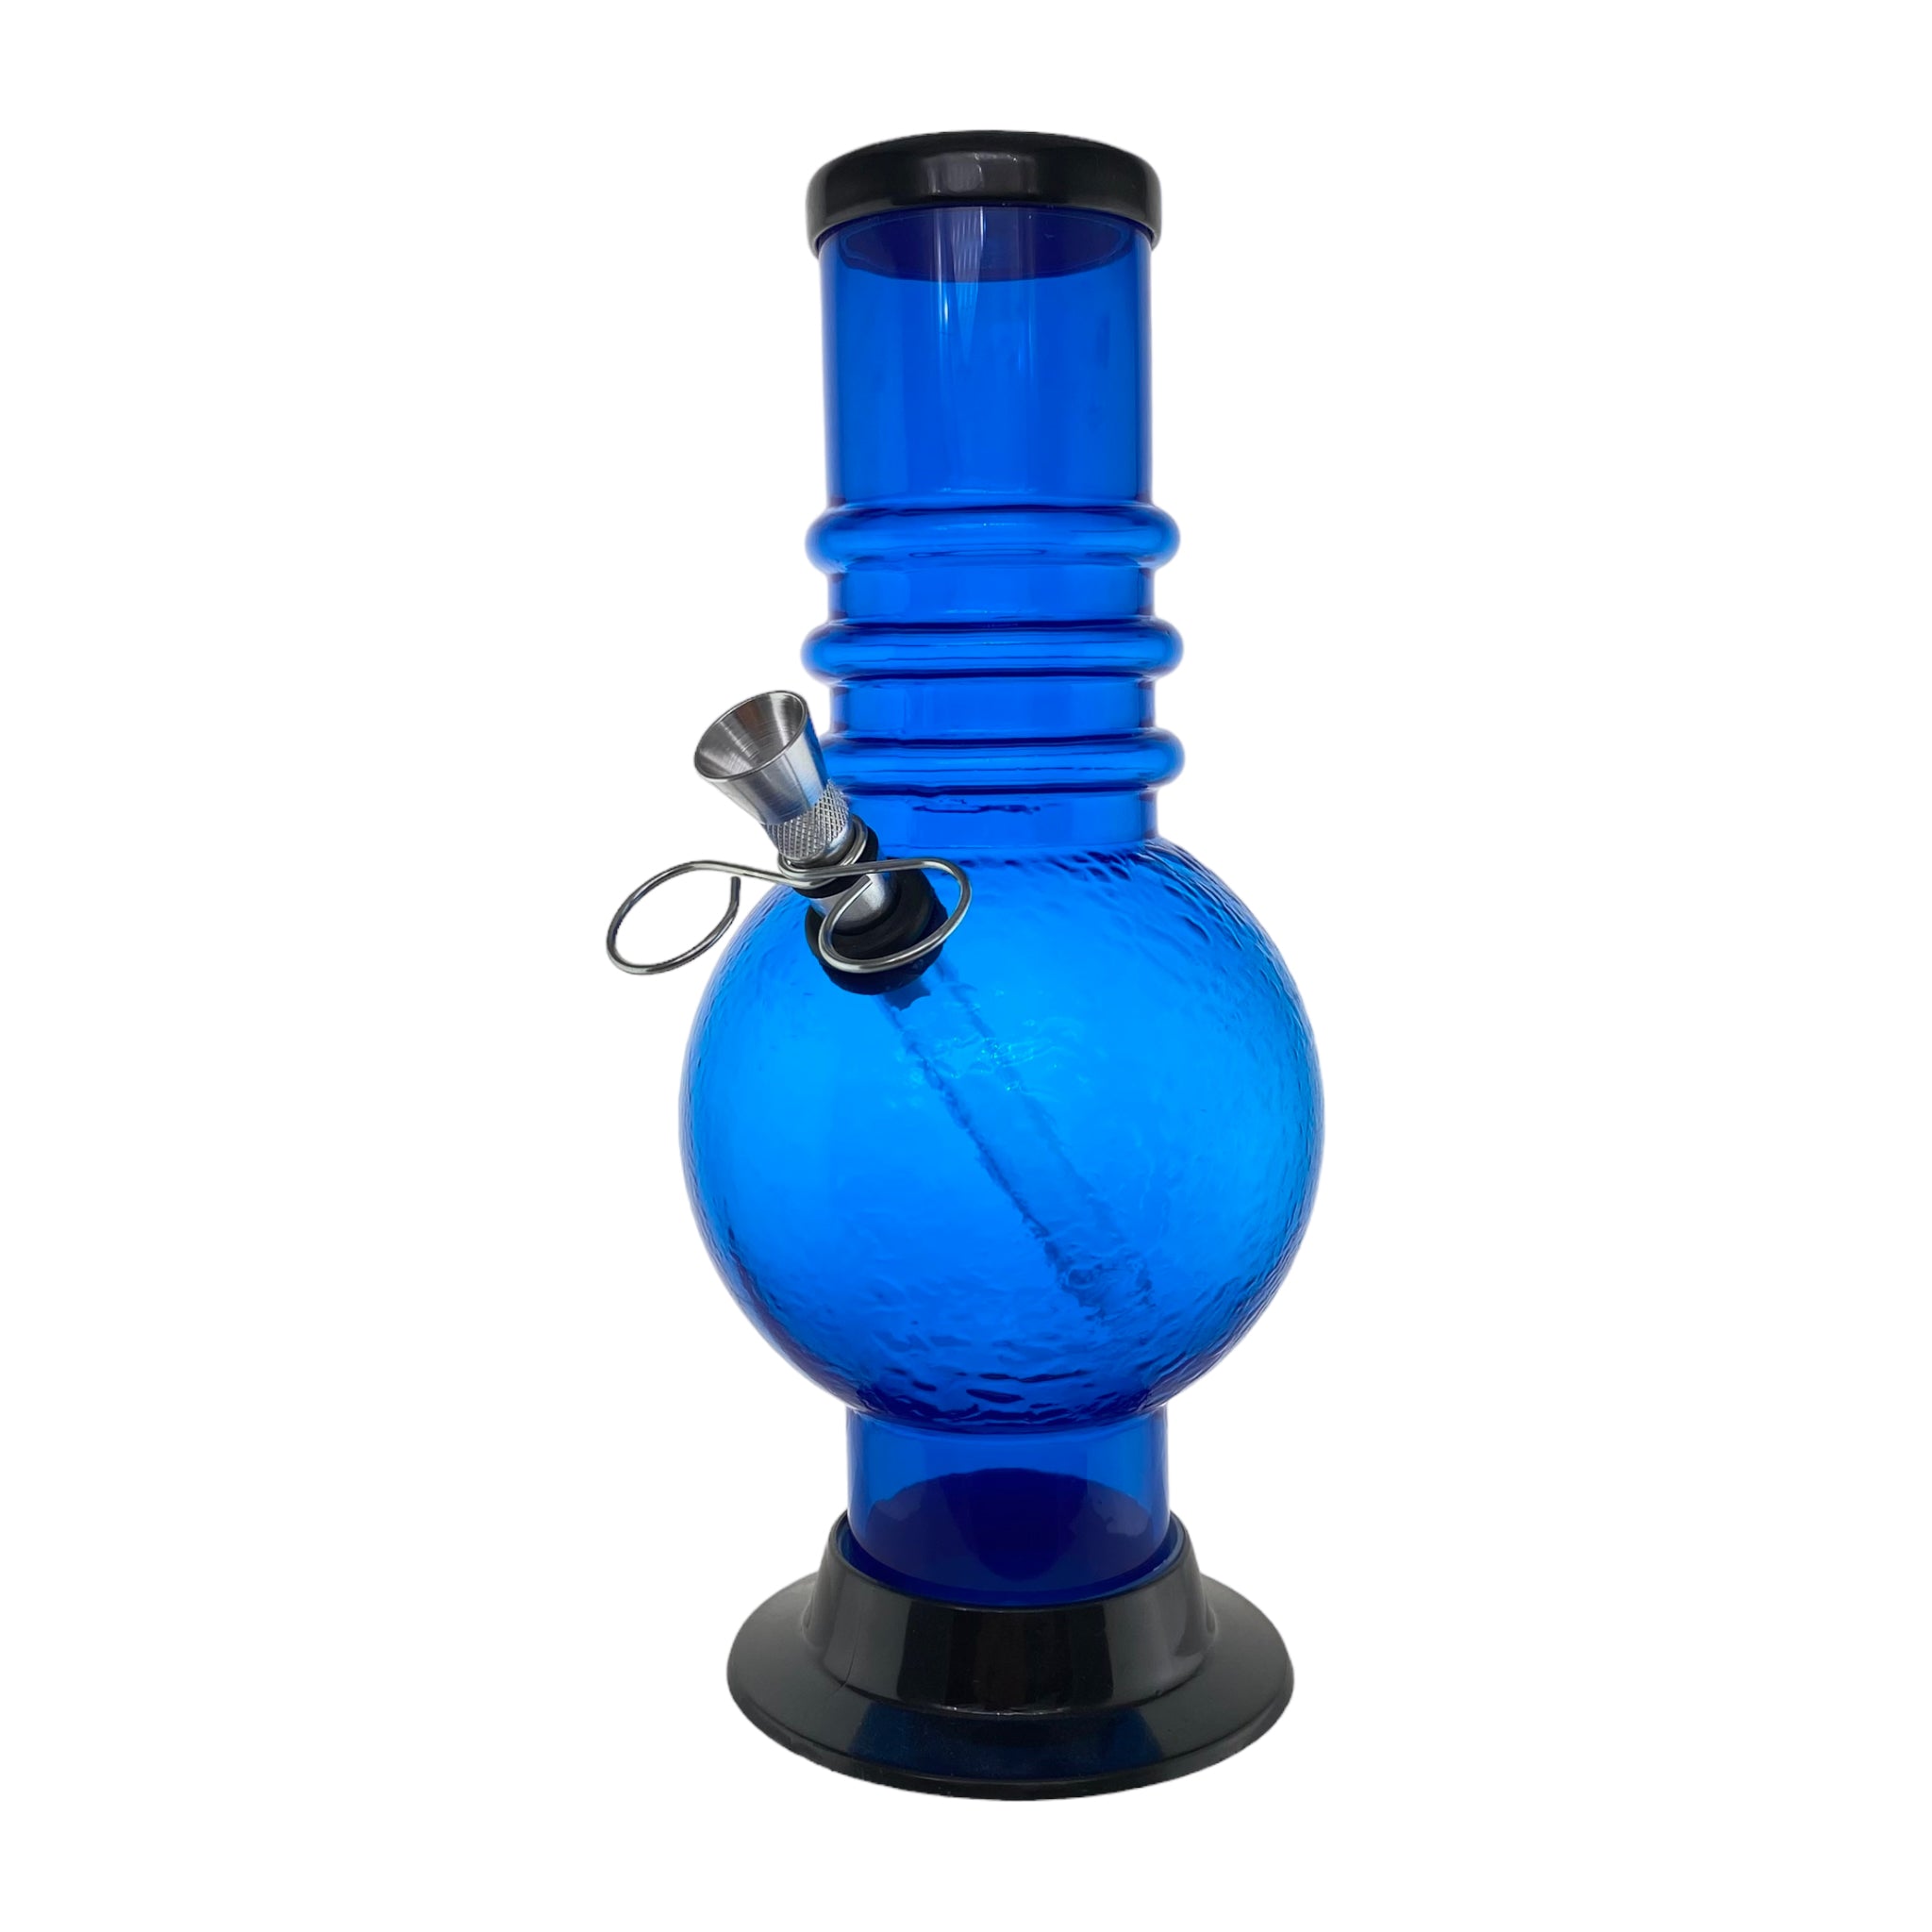 Acrylic Plastic Pull Bowl Bong Bubble 9 Inches - Blue